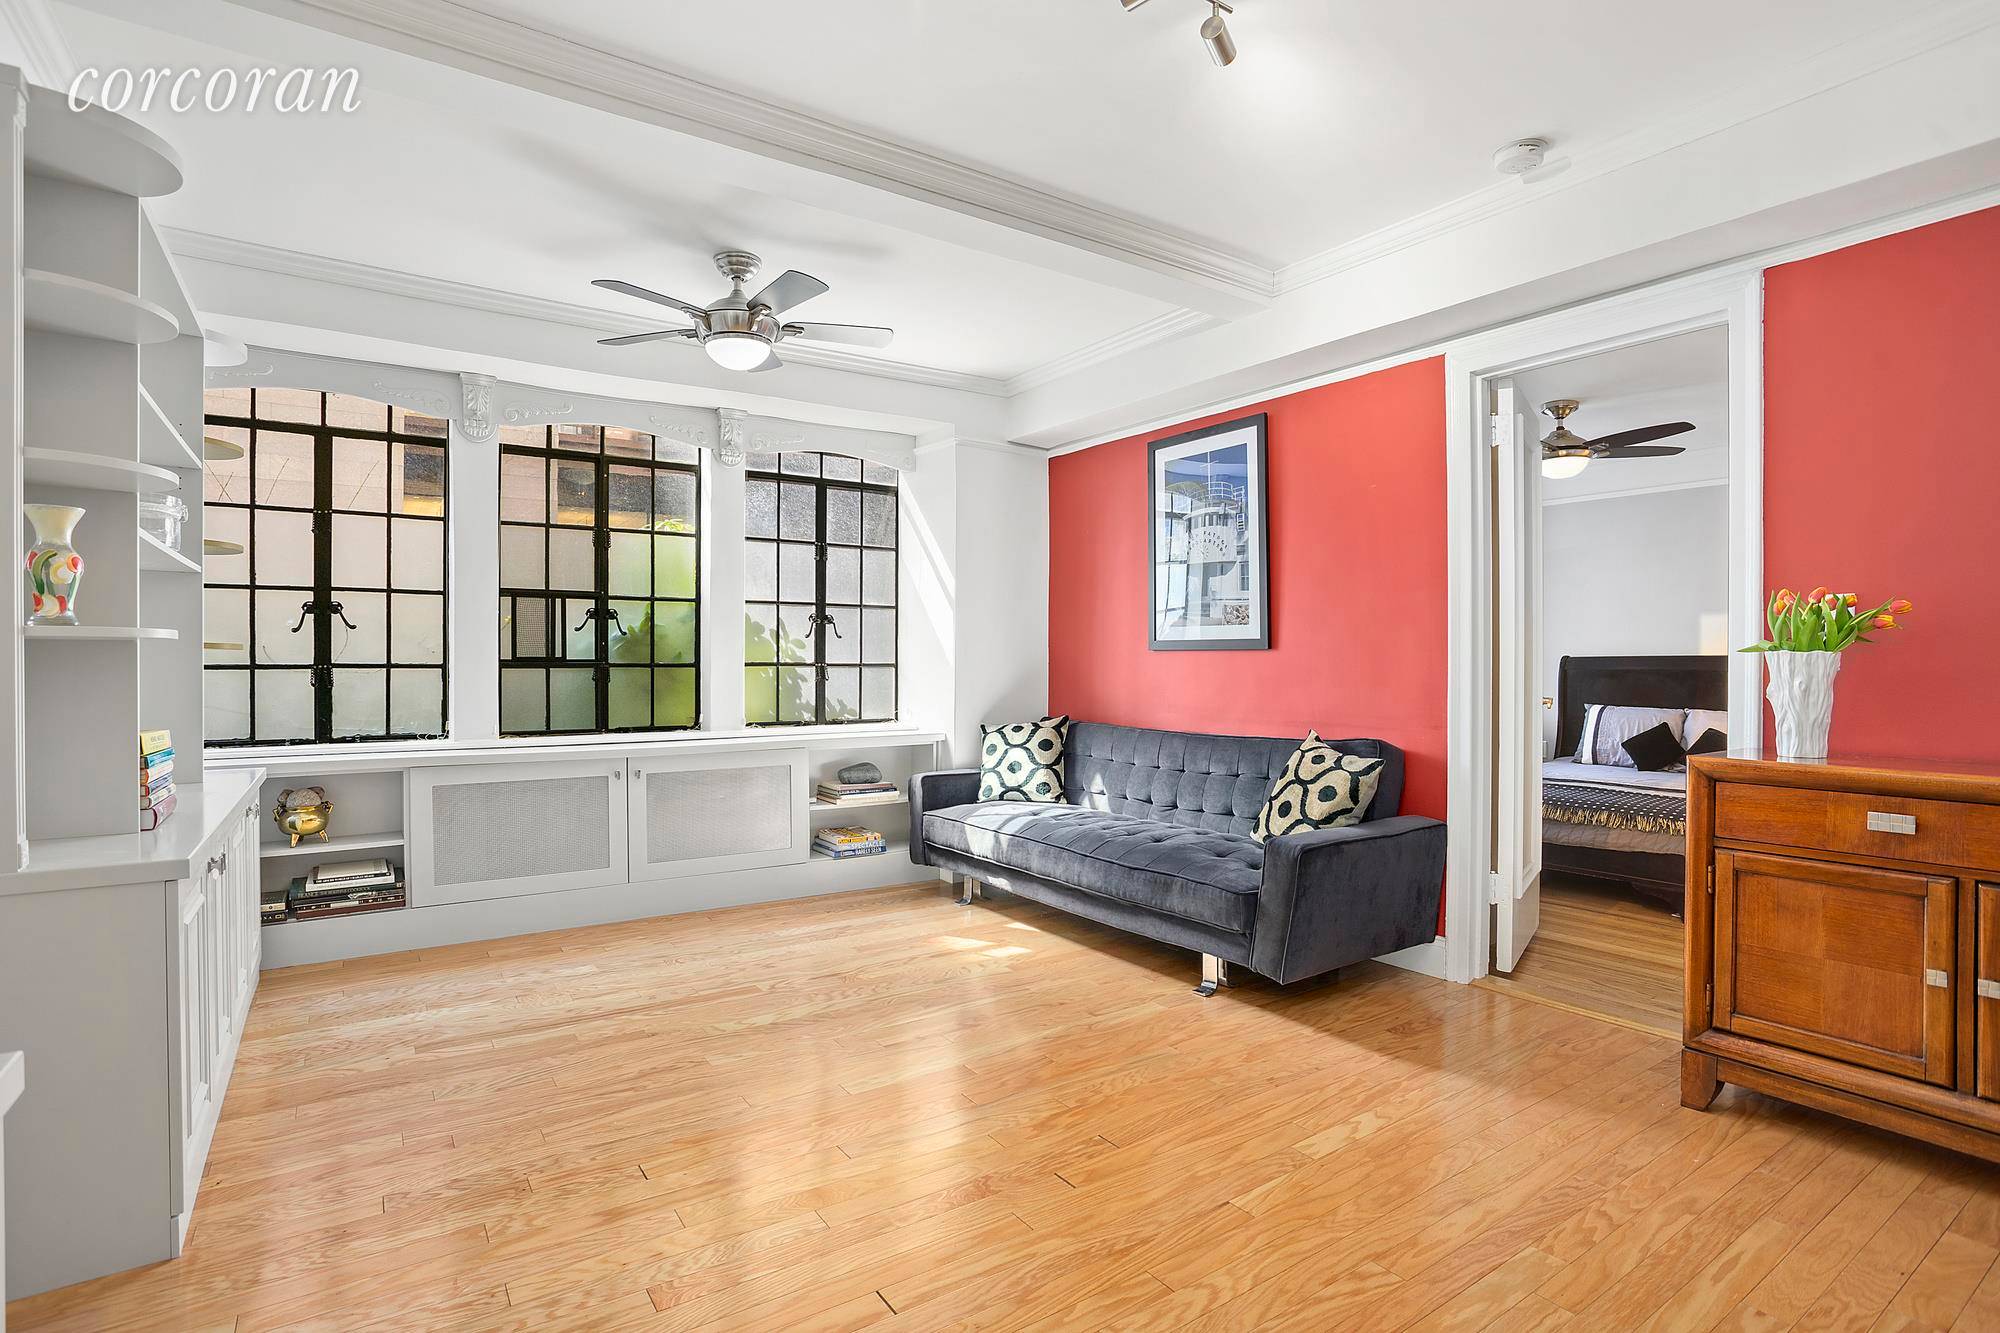 Meticulous 2BR 2BA, located in one of Tudor City's sparkling gem coop buildings, The Cloister.